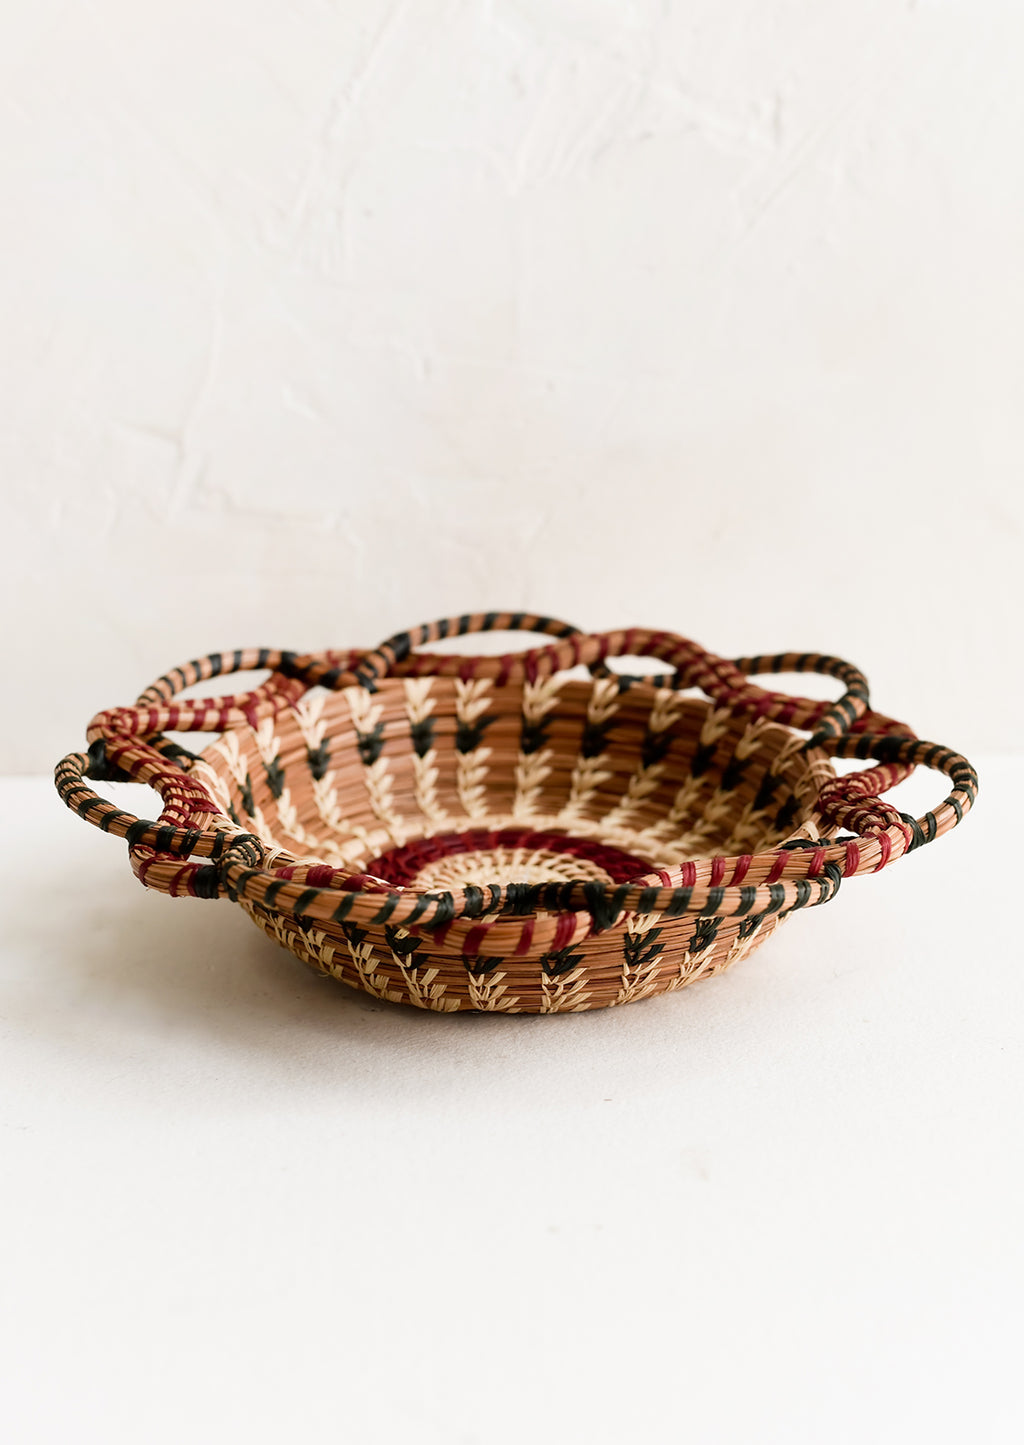 2: A woven basket with swirling, intertwined silhouette.